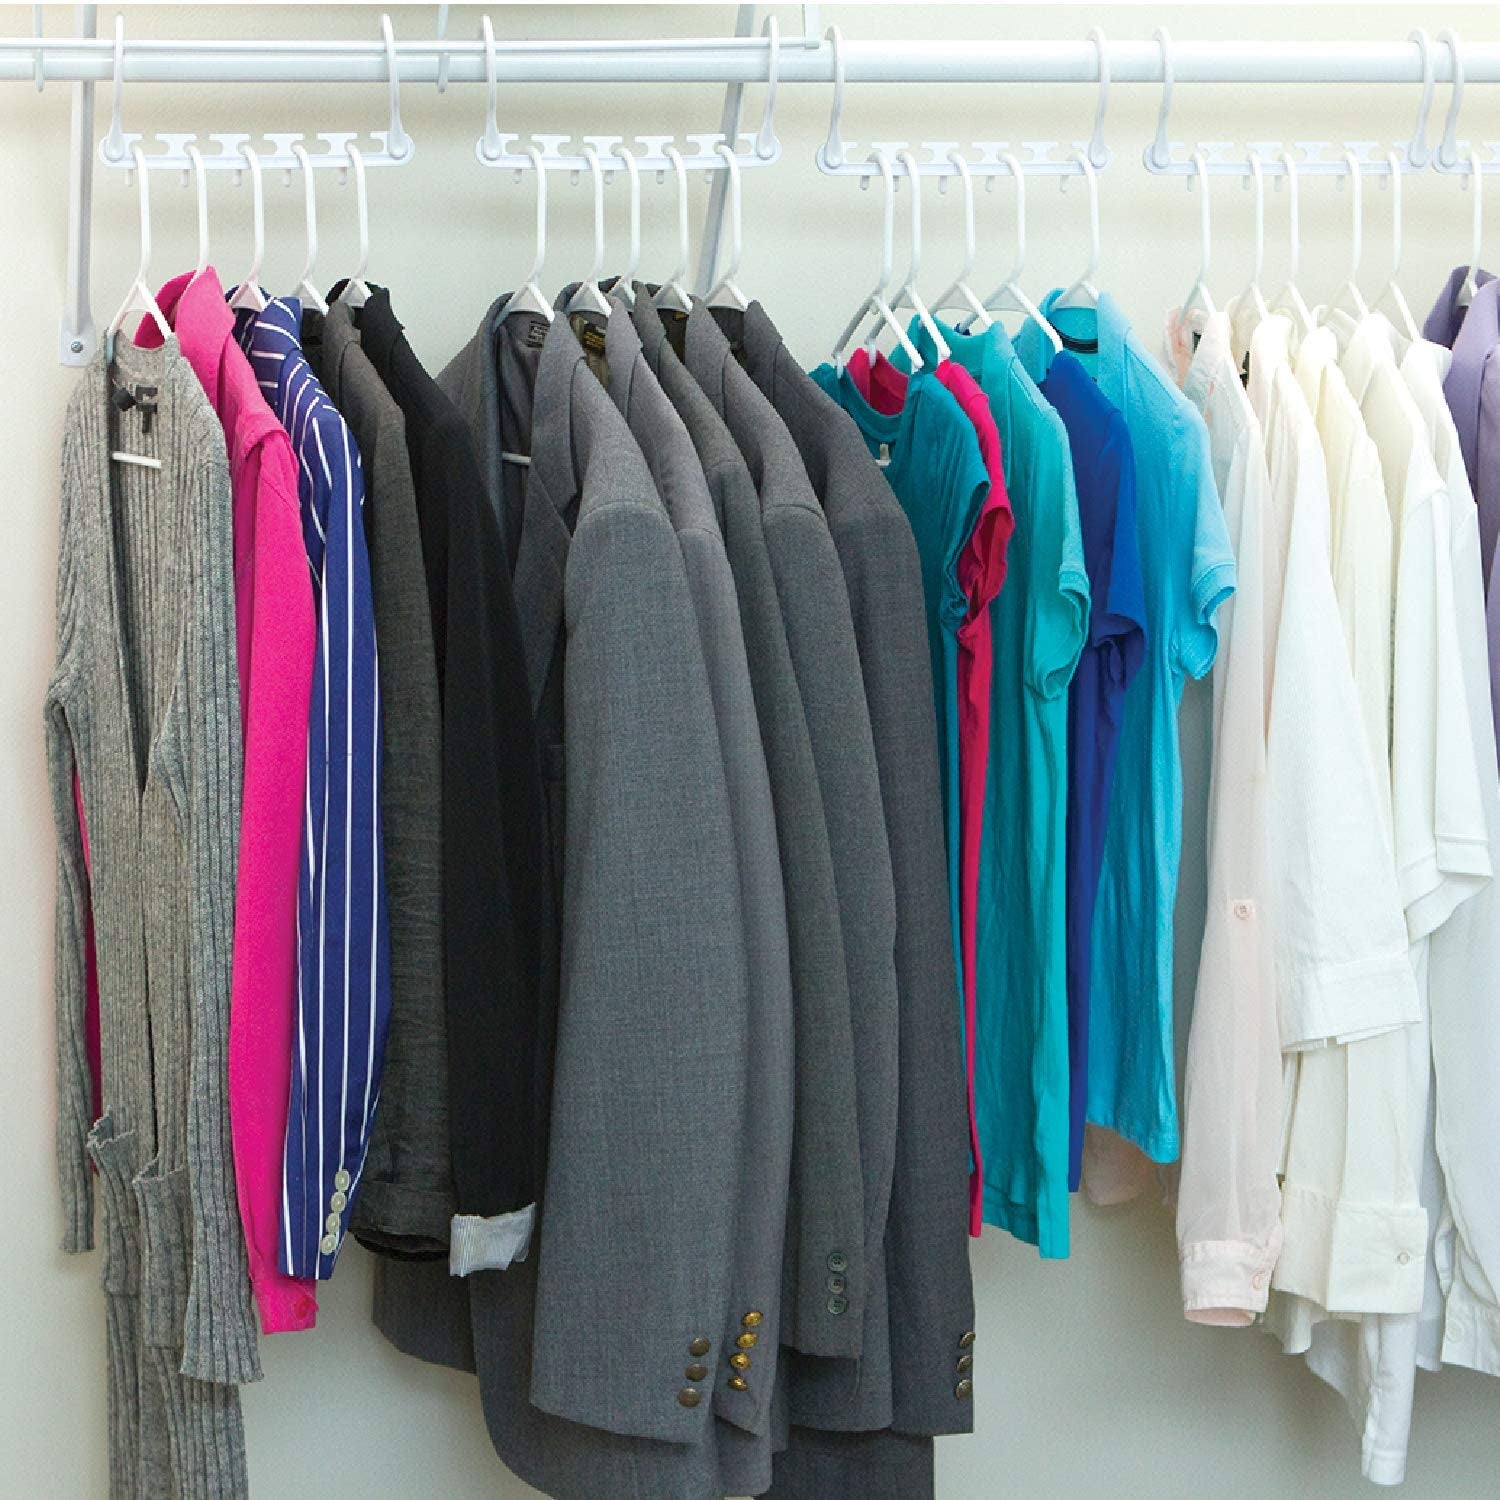 clothes hanging horizontally on wonder hangers in a closet